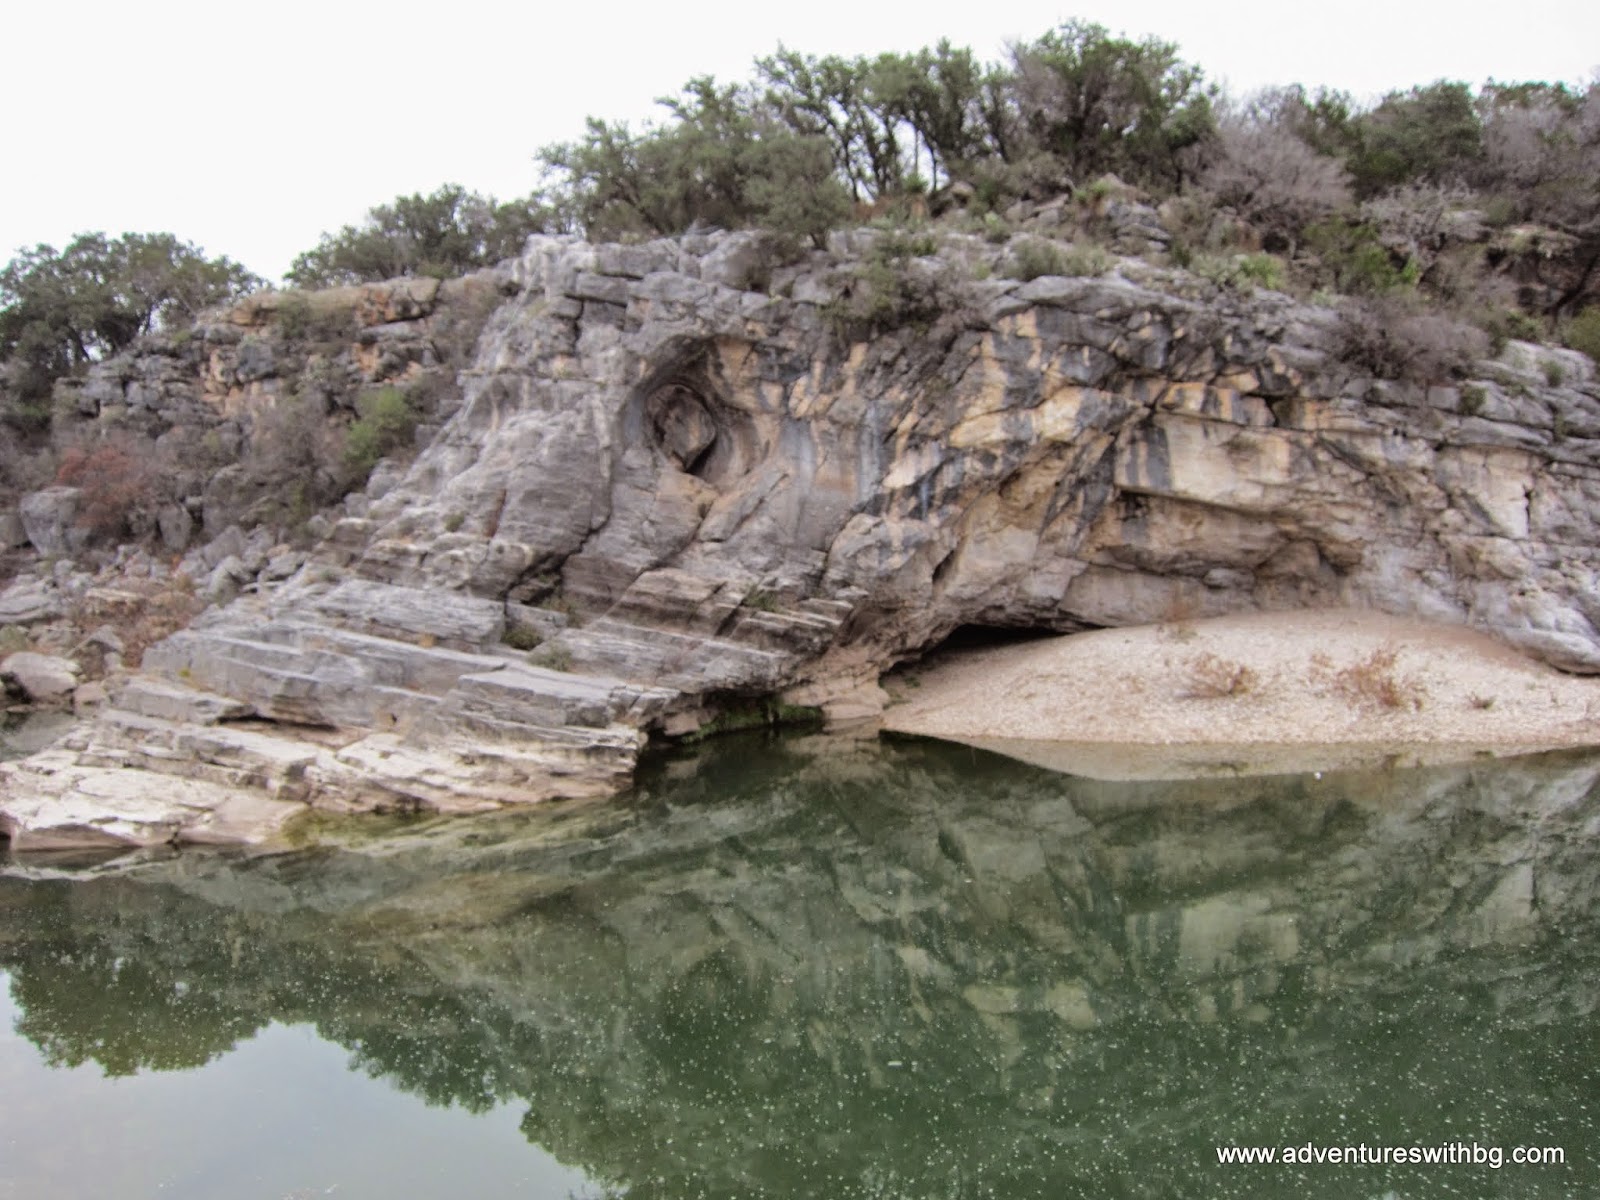 The hole is at least 10 feet above the Pedernales River